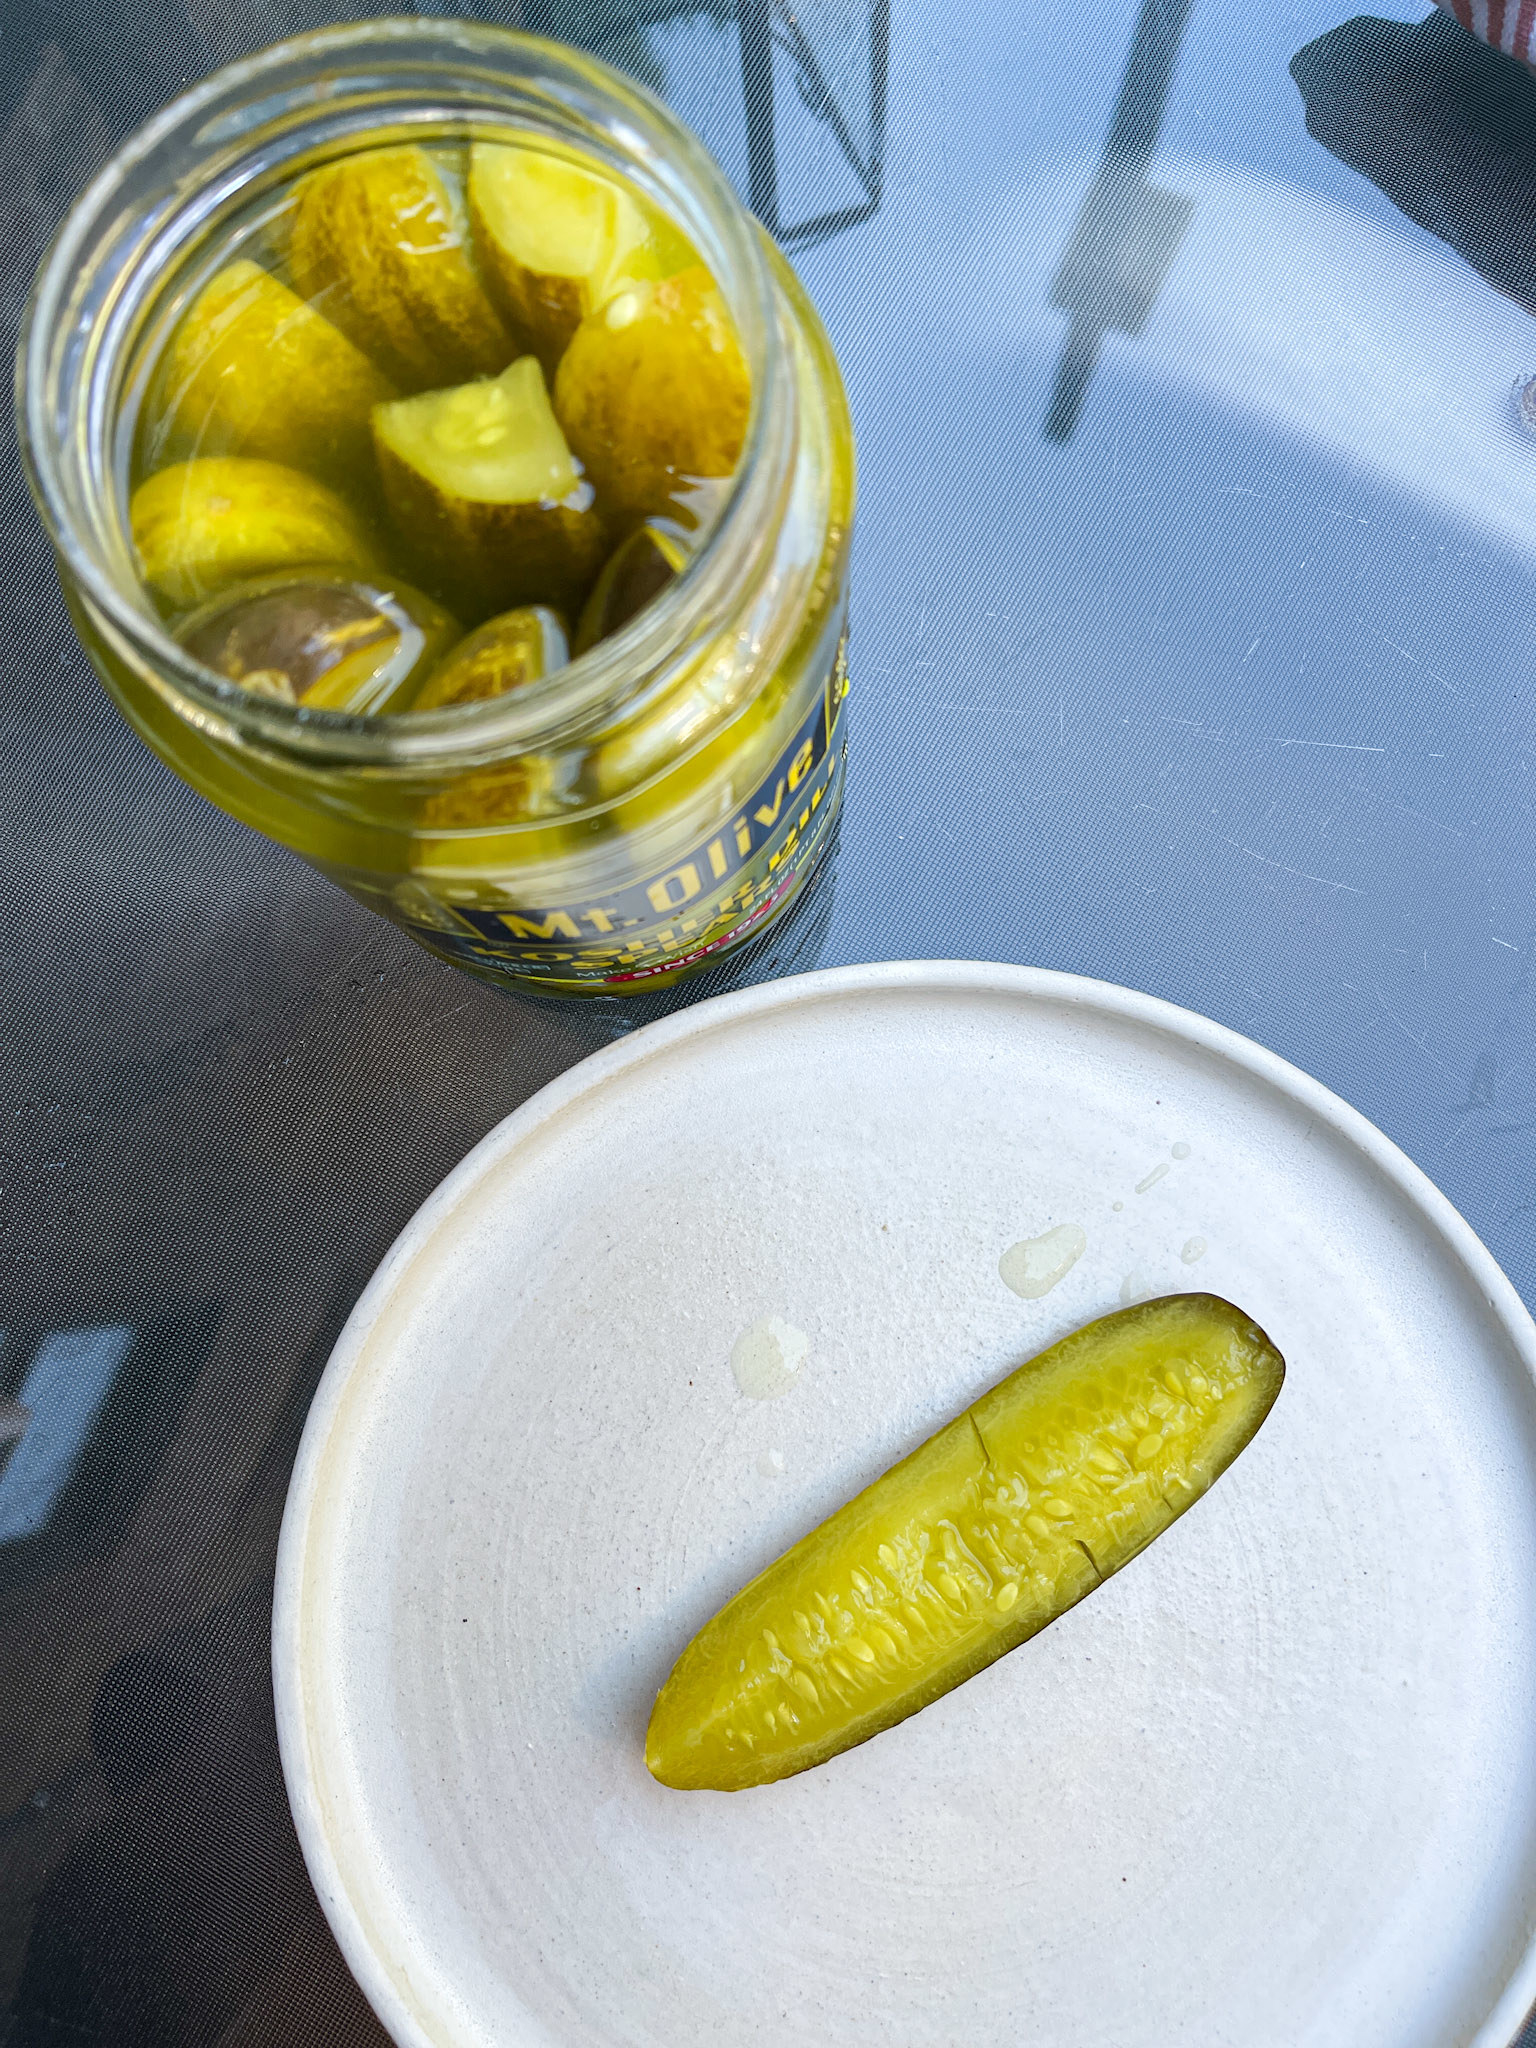 Open jar of pickles with one pickle on a paper plate, on a glass table